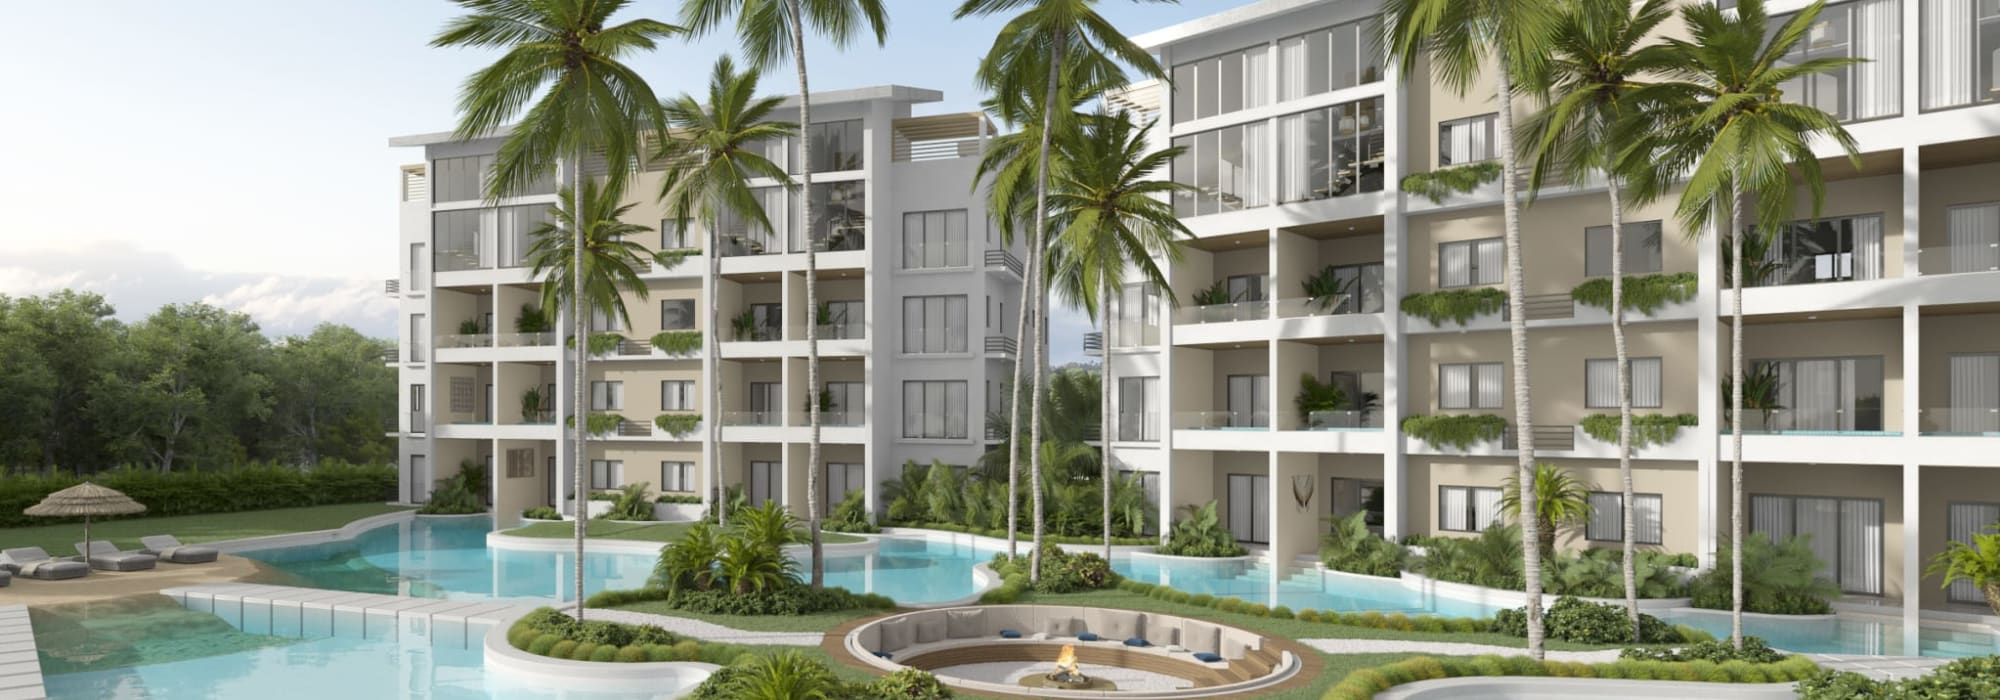 Project of Beautiful Apartments in Bavaria, Punta Cana